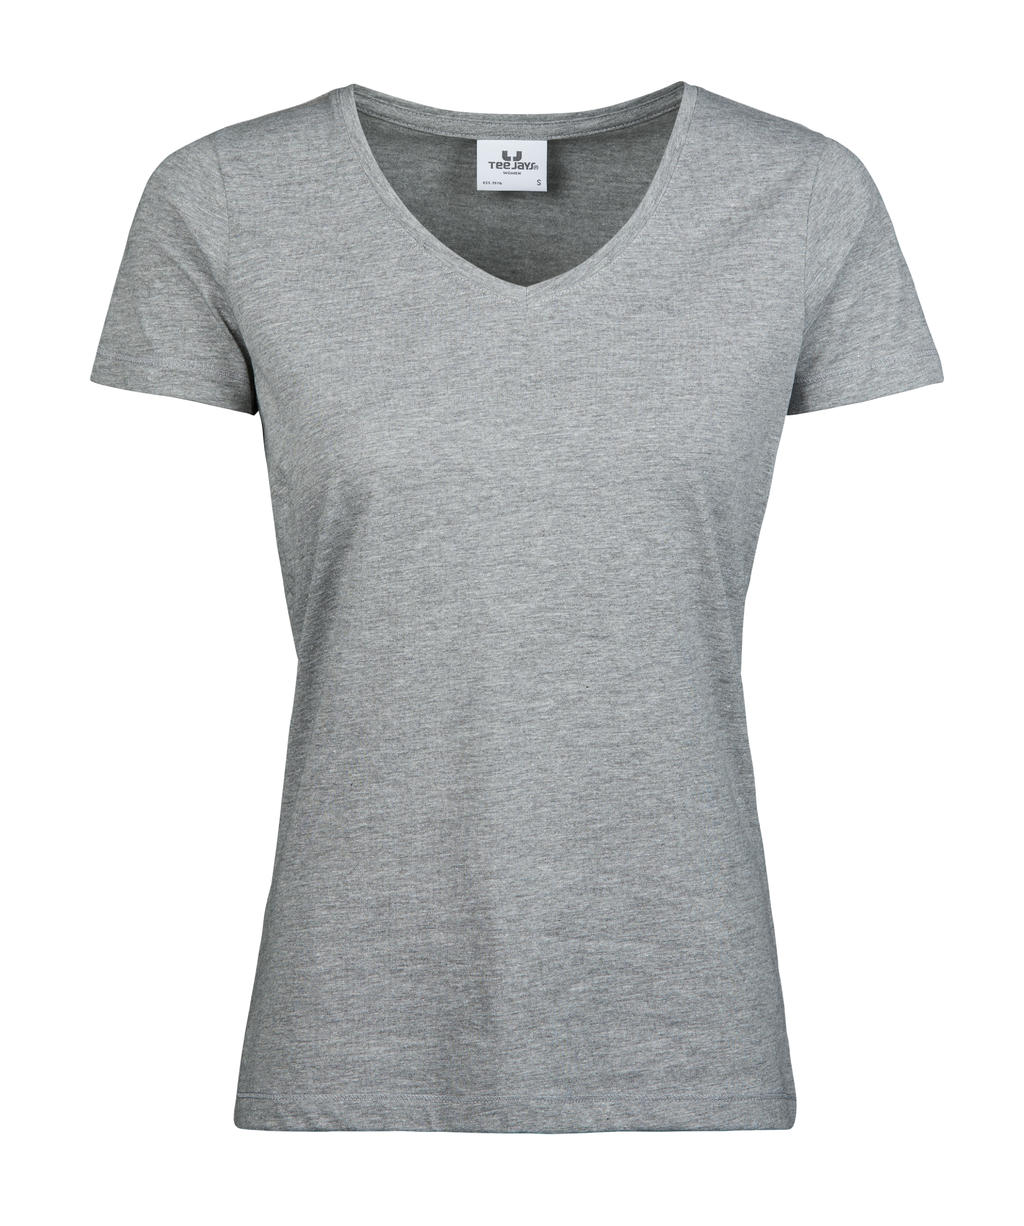  Womens Luxury V-Neck Tee in Farbe Heather Grey